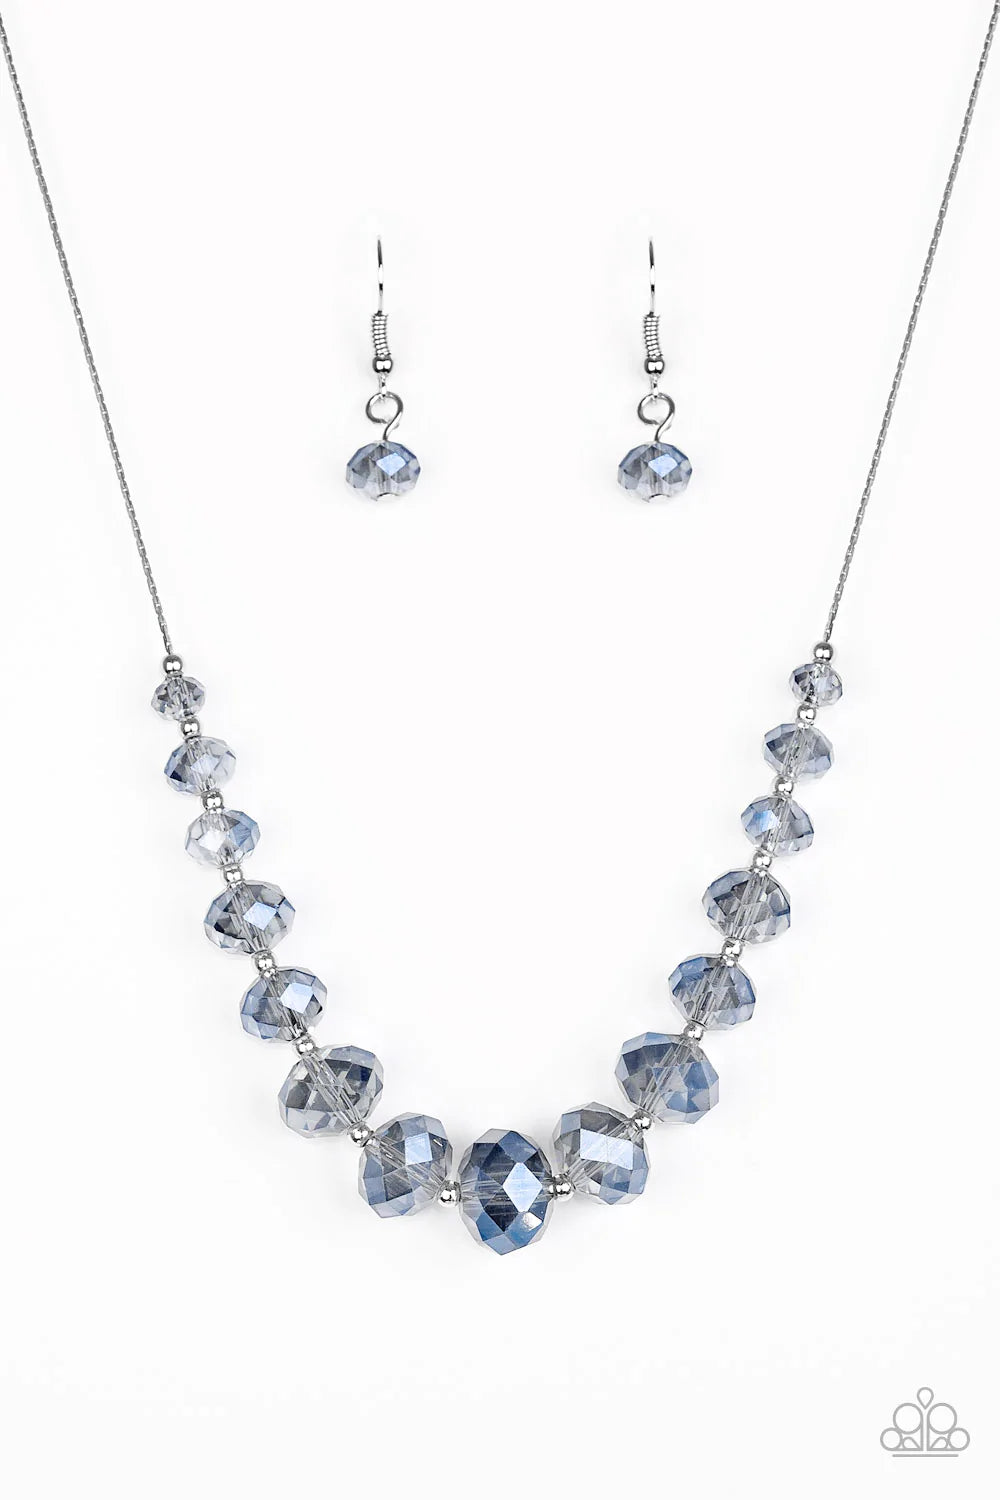 Paparazzi Necklace ~ Crystal Carriages - Blue